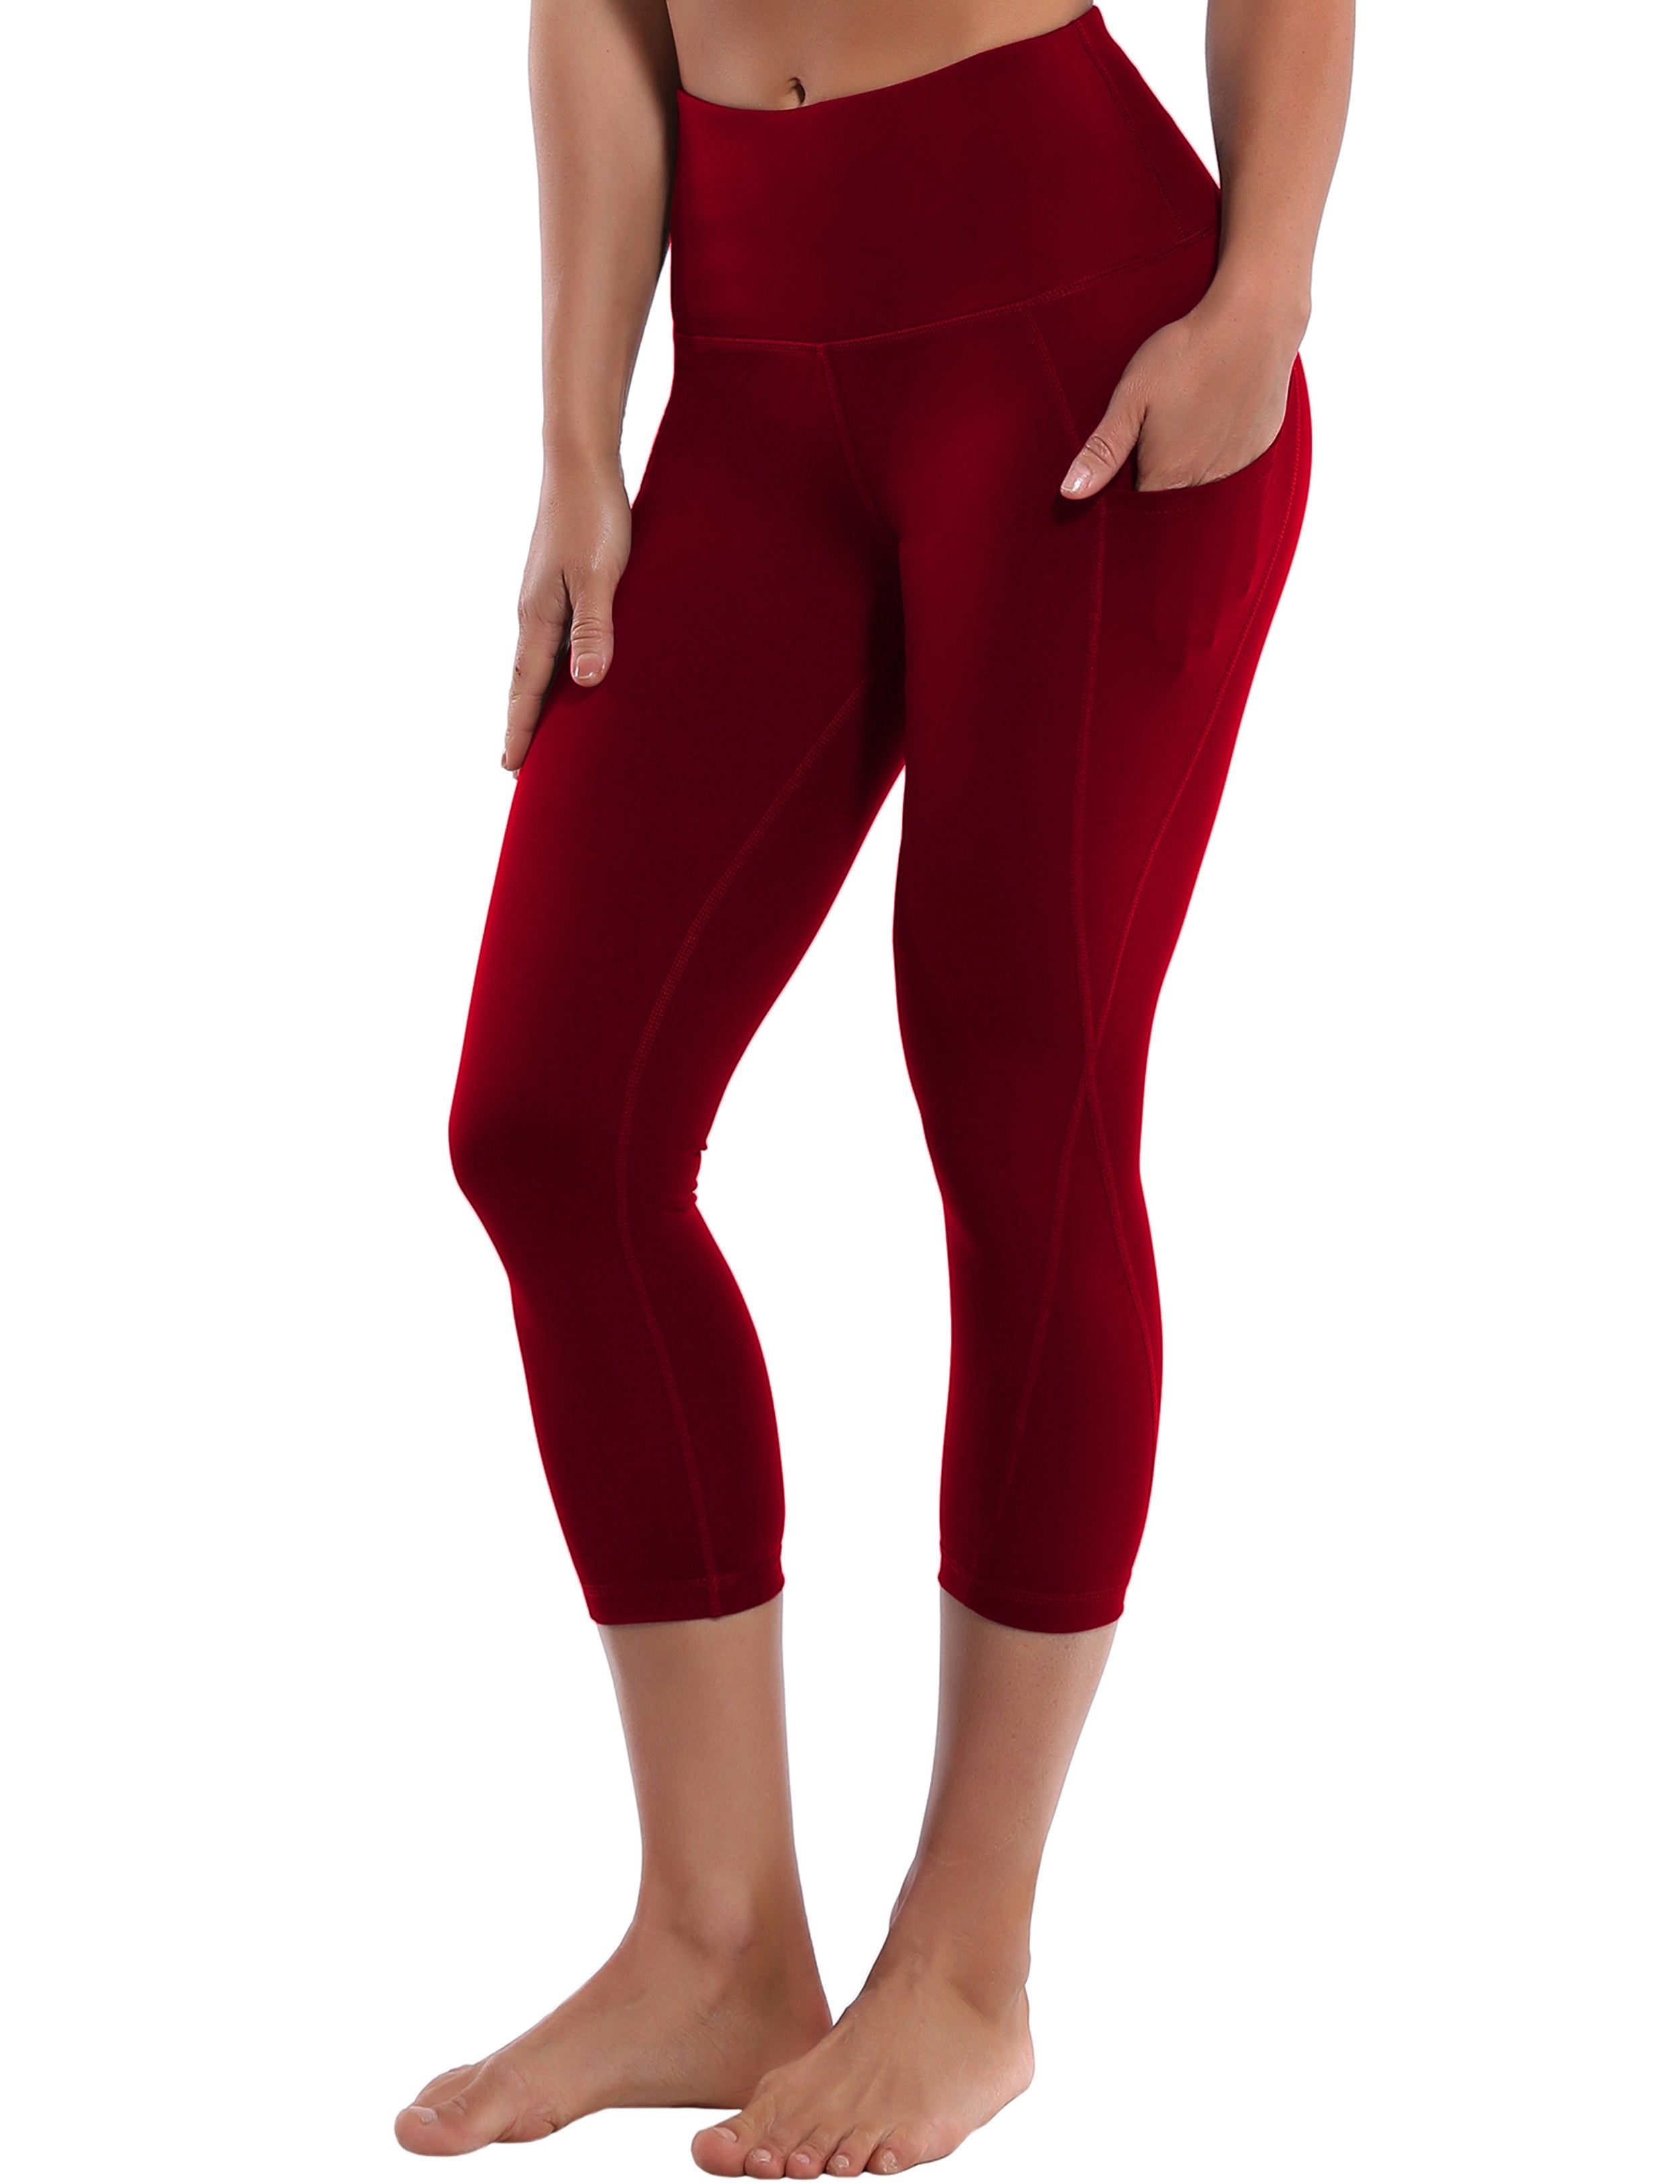 19" High Waist Side Pockets Capris cherryred 75%Nylon/25%Spandex Fabric doesn't attract lint easily 4-way stretch No see-through Moisture-wicking Tummy control Inner pocket